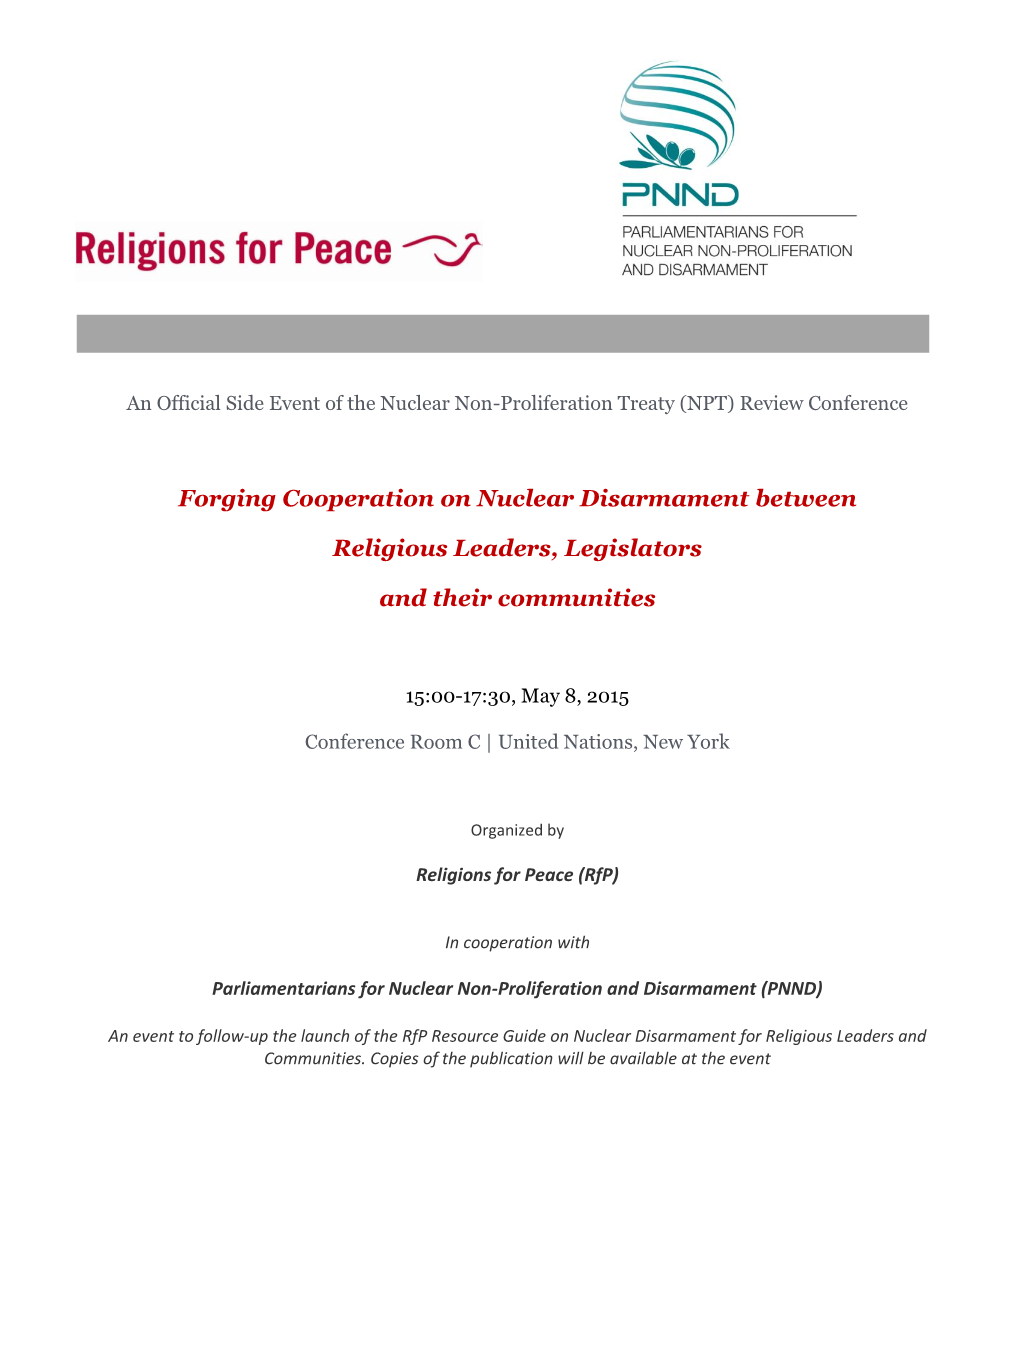 Forging Cooperation on Nuclear Disarmament Between Religious